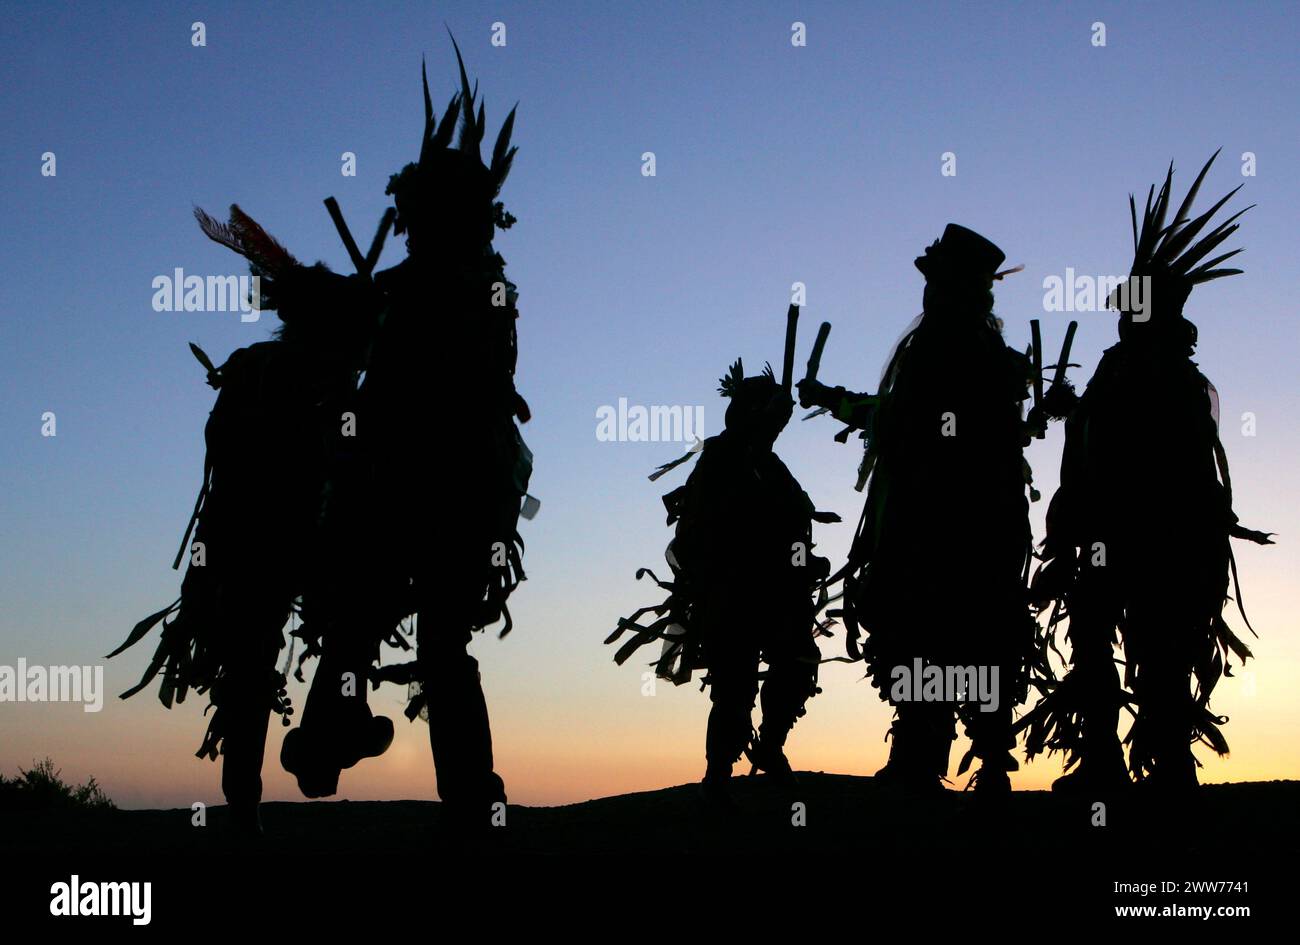 01/05/11. ..As May Day dawn breaks, The Powderkegs - Border Morris Dancers, dance on the top of Alderley Edge,  overlooking the Cheshire Plain. The Po Stock Photo